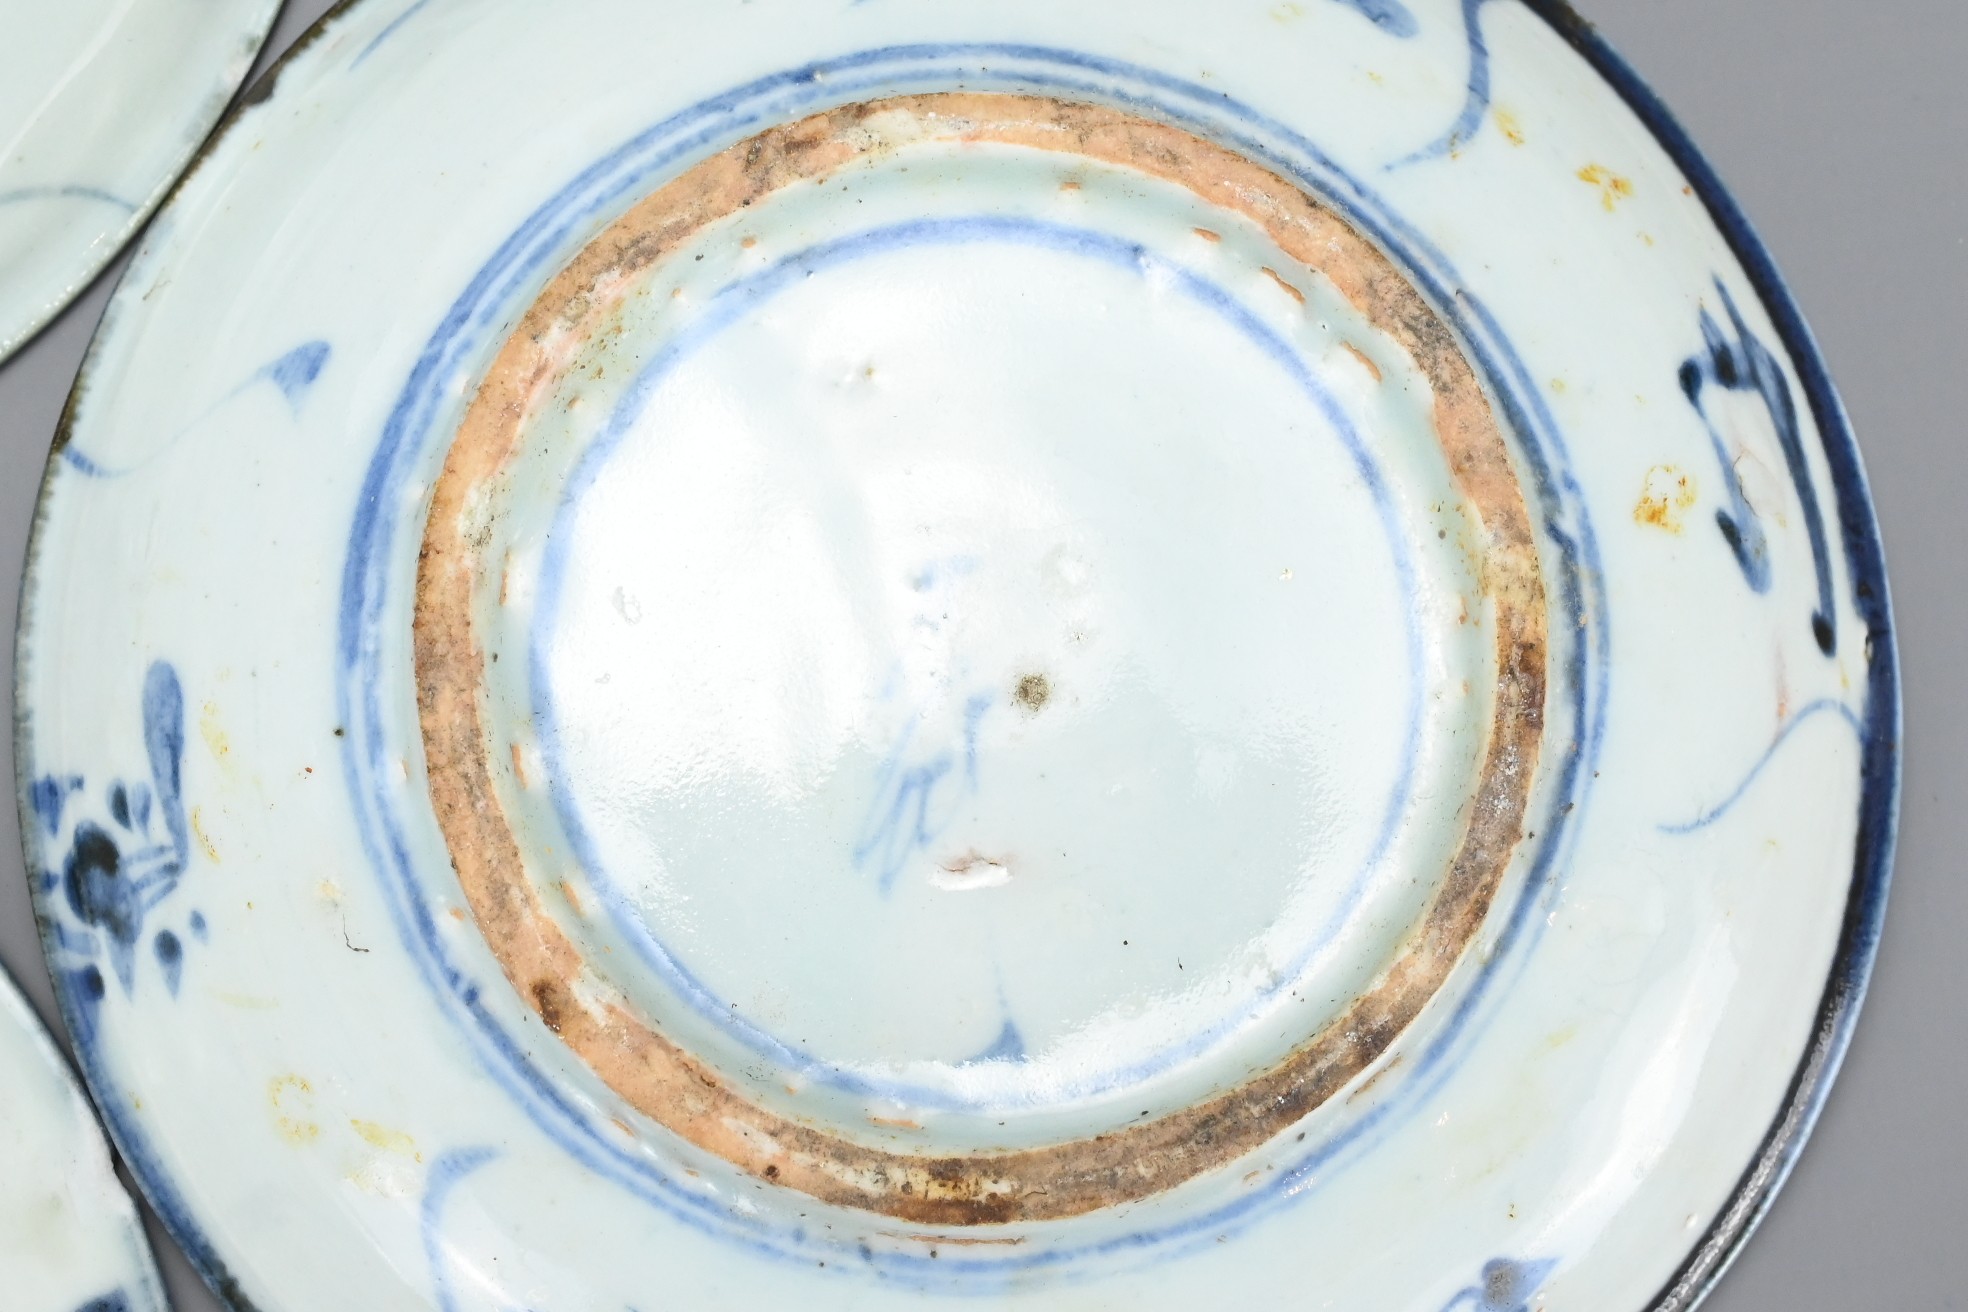 A GROUP OF CHINESE BLUE AND WHITE PORCELAIN DISHES, EARLY 19TH CENTURY. Each with floral and - Image 10 of 12